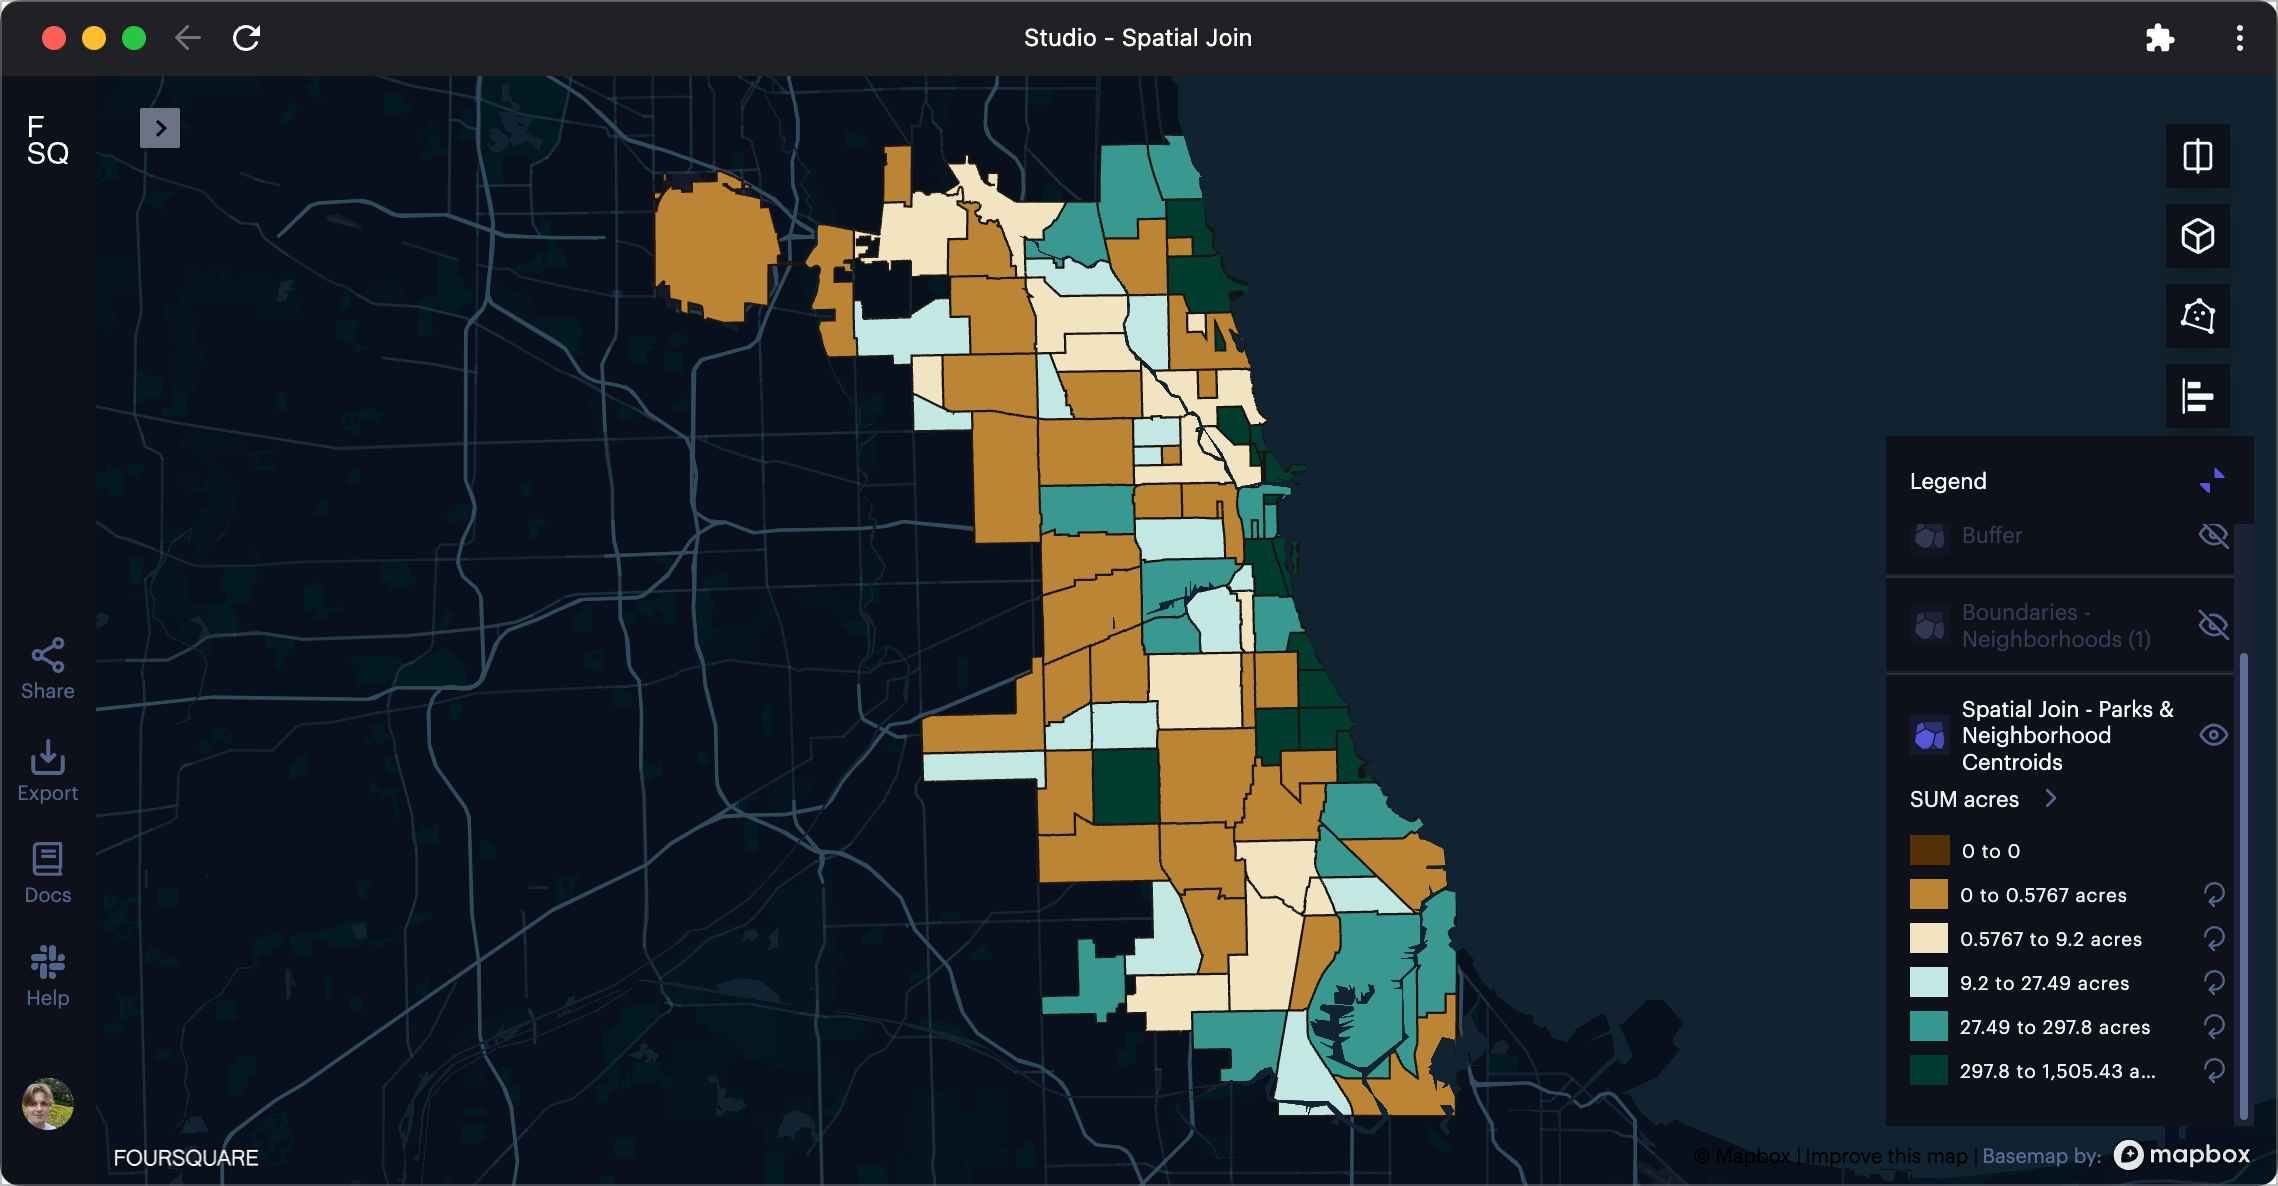 Chicago neighborhoods colored by centroid park acreage. 